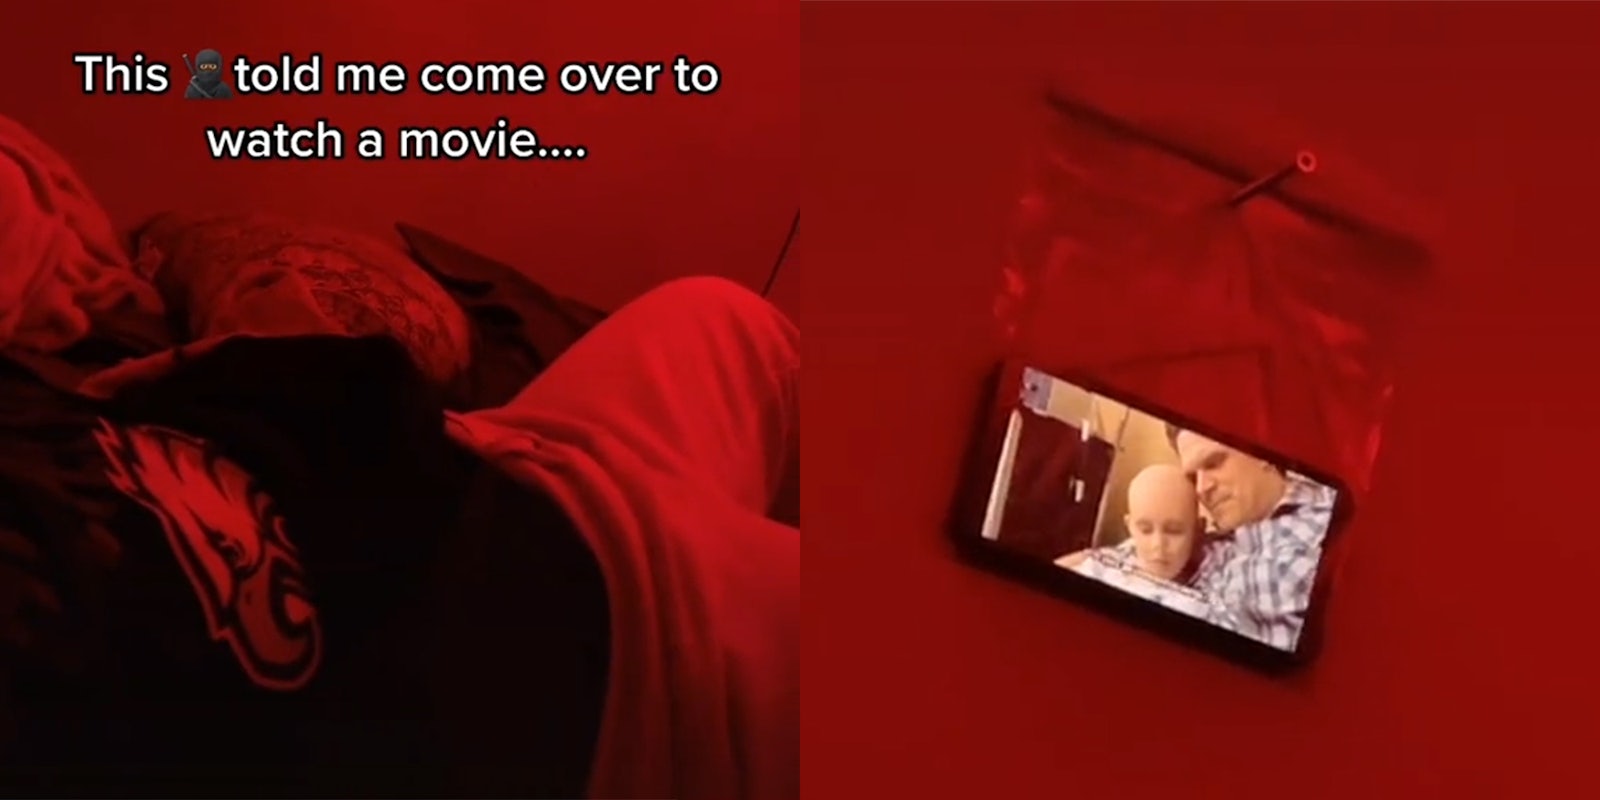 man on bed with Eagles logo and caption 'this ninja told me to come over to watch a movie...' (l) movie playing on phone inside plastic bag screwed to wall (r)